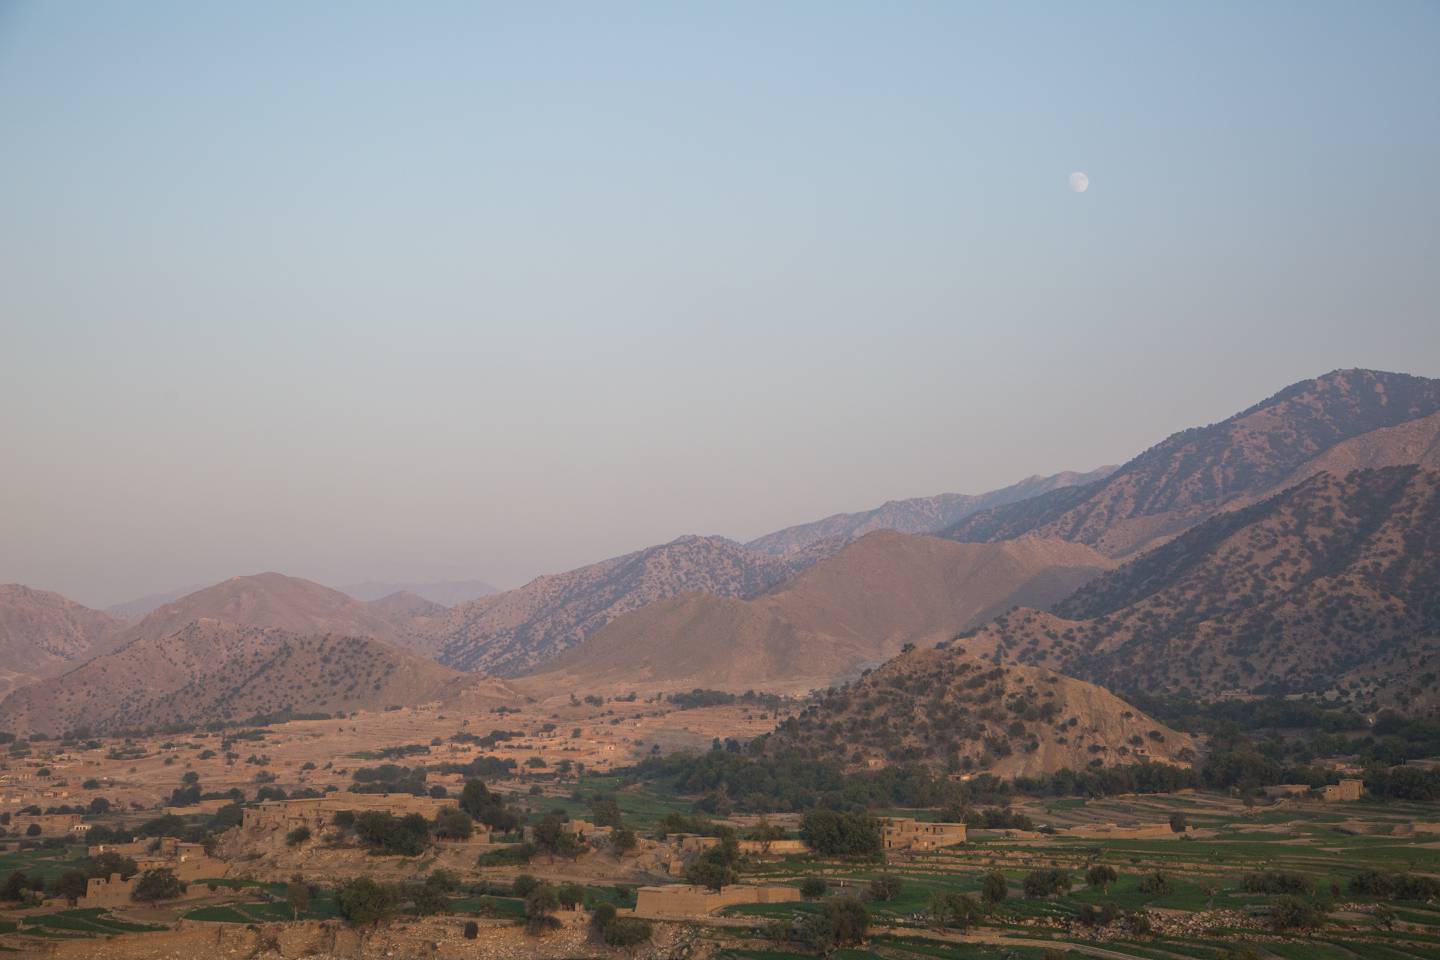 The moon rises over Pekha Valley, Achin District, Nangahar Province, Afghanistan, Sept. 3, 2017.